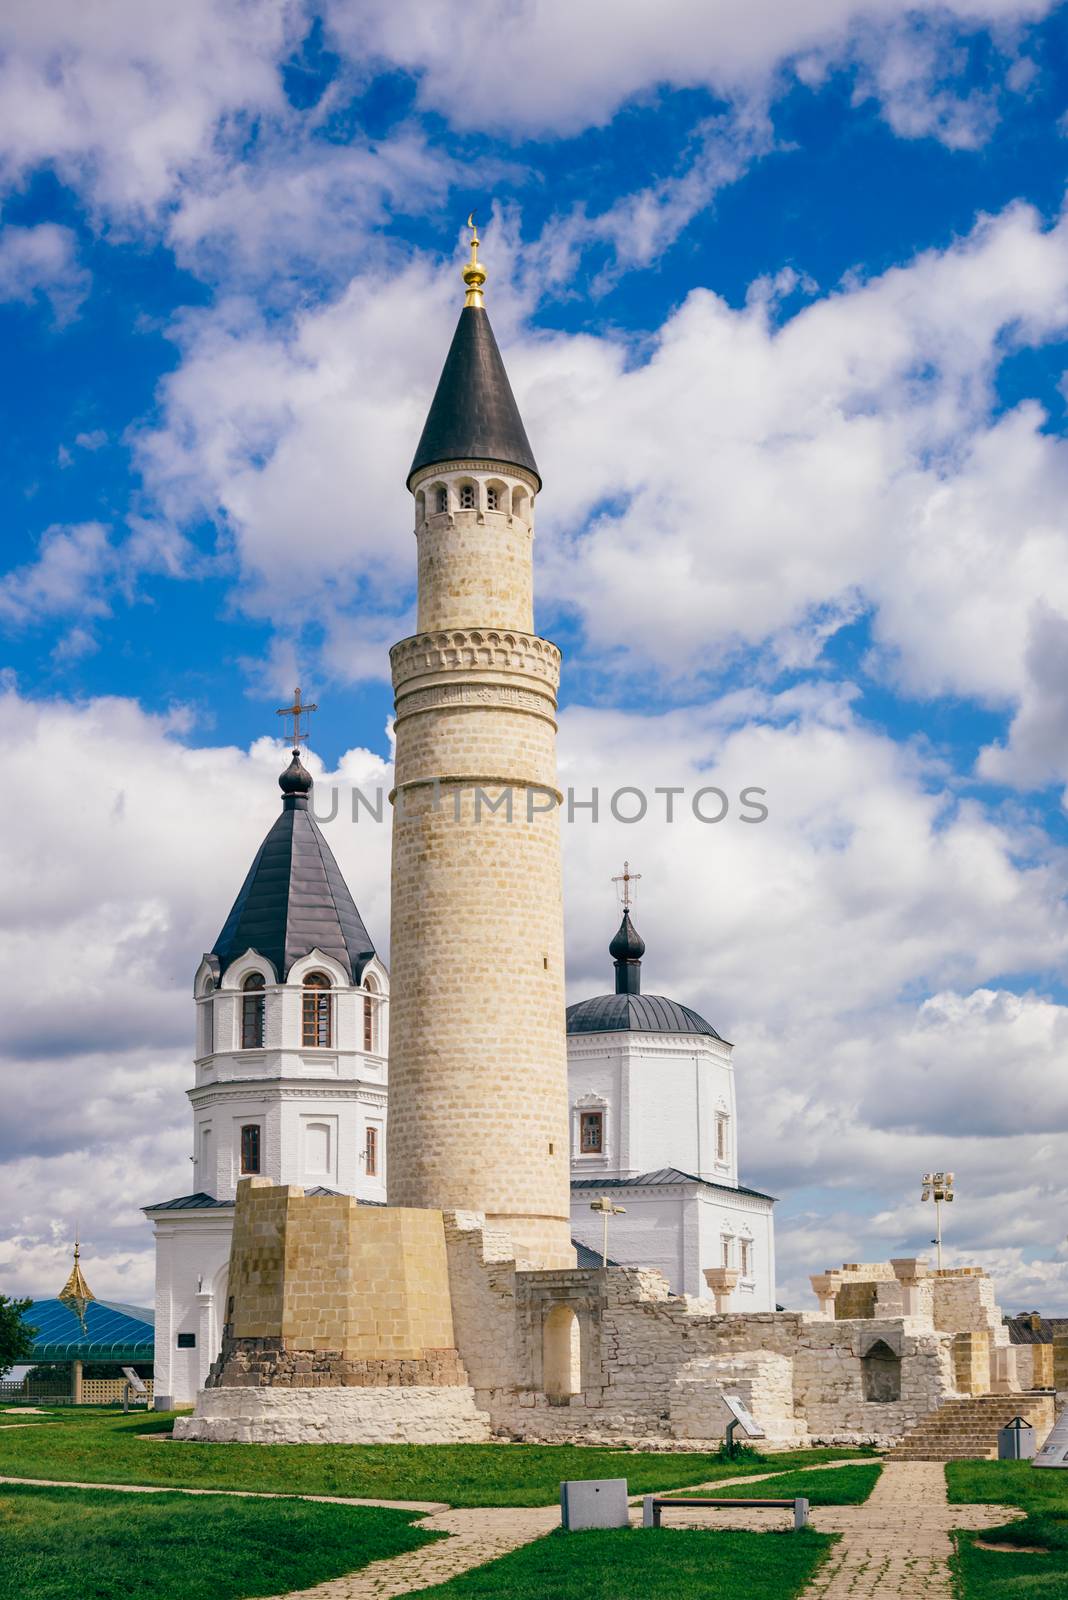 Ruins of Cathedral Mosque with Big Minaret. Dormition Church on Background. Bolghar, Russia.